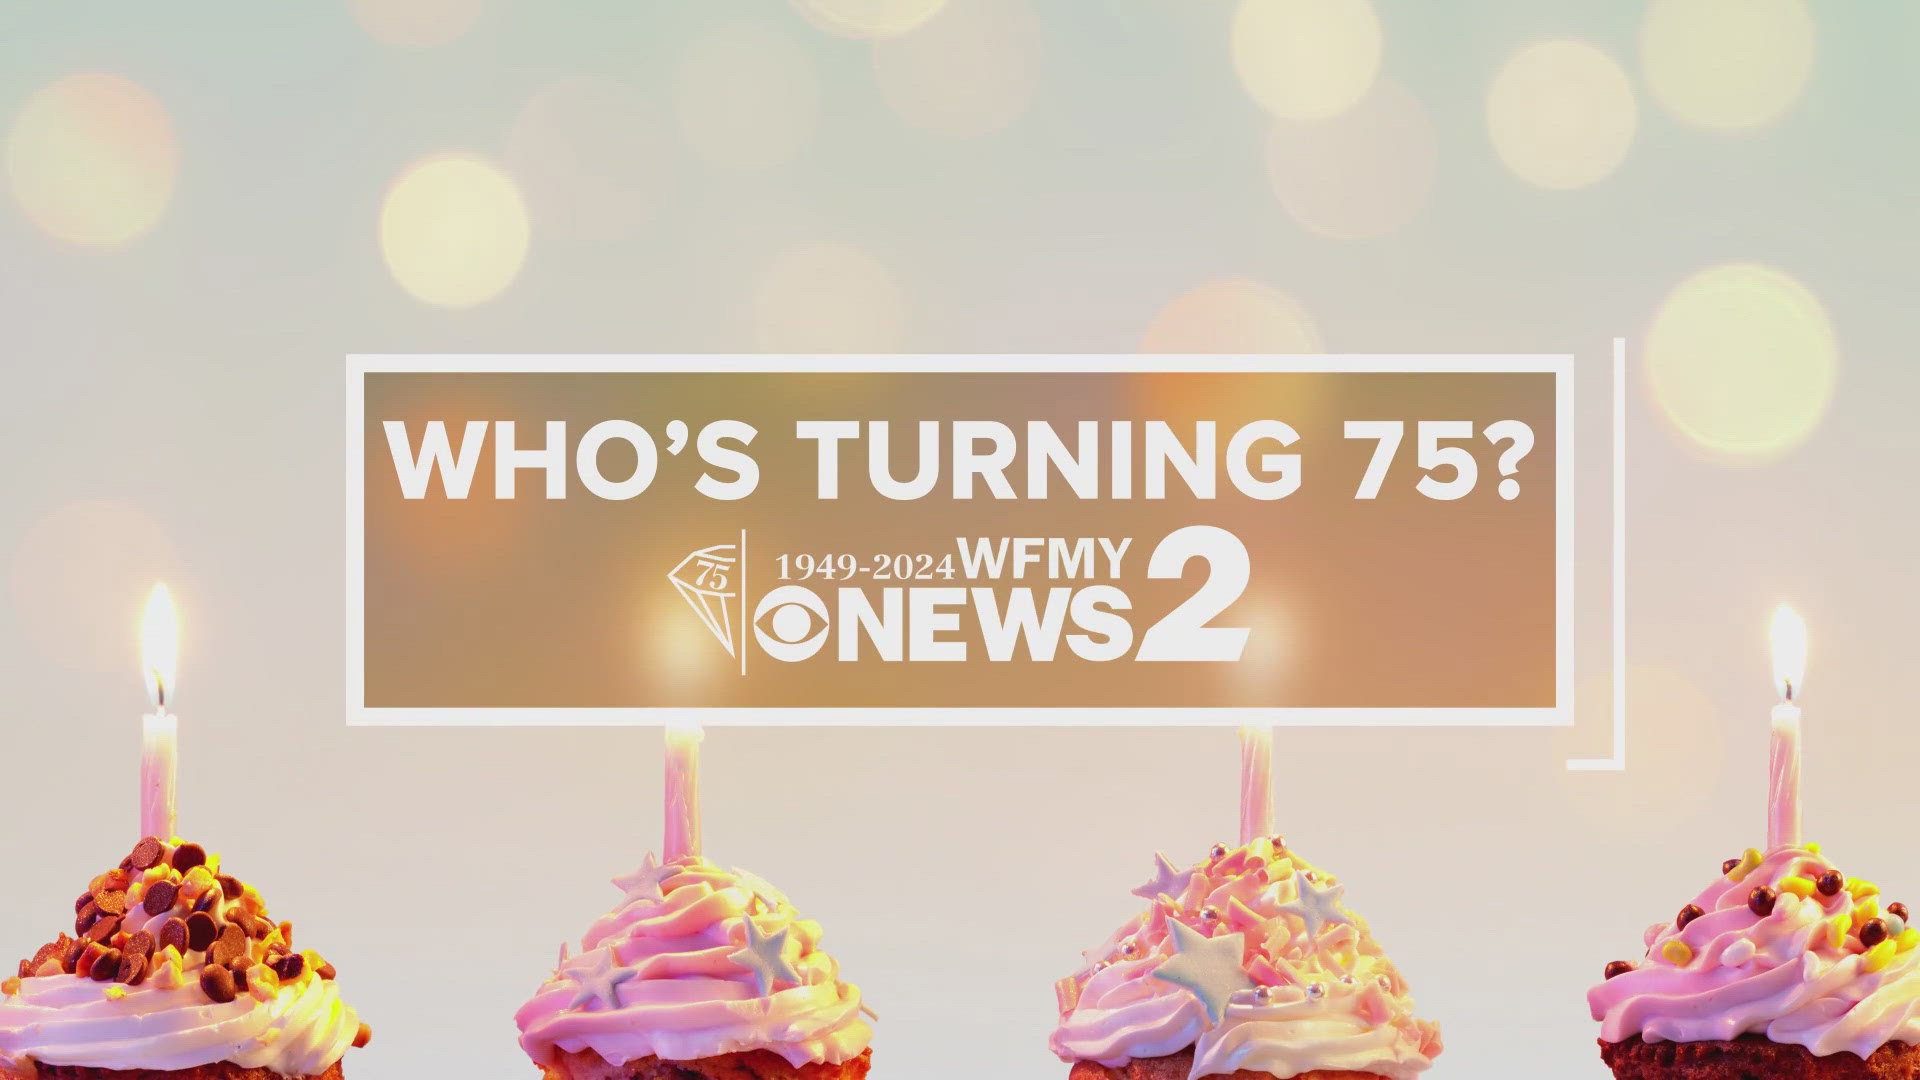 As WFMY News 2 celebrates 75 years, we want to celebrate viewers who are turning 75, too.